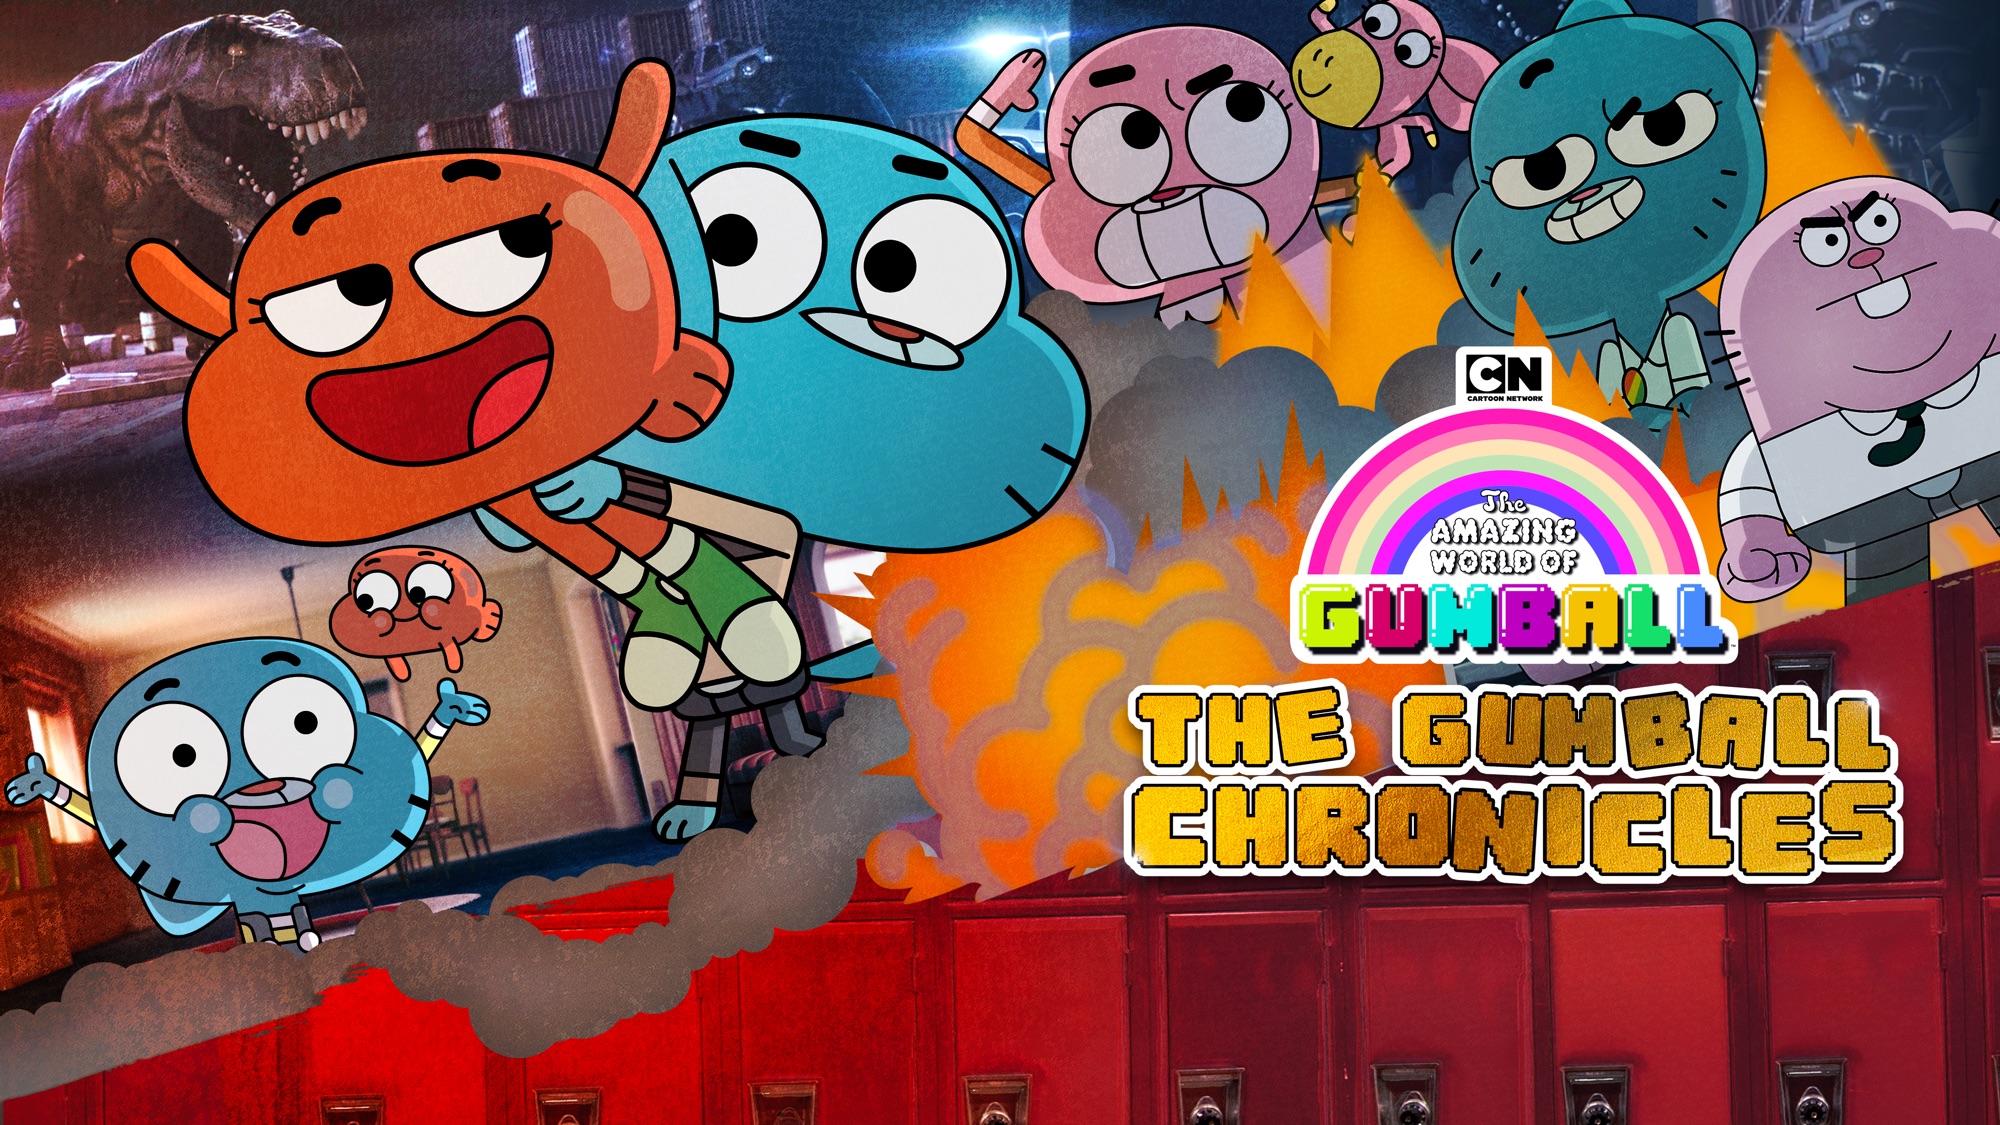 Amazing World of Gumball Were Cartoon Rejects